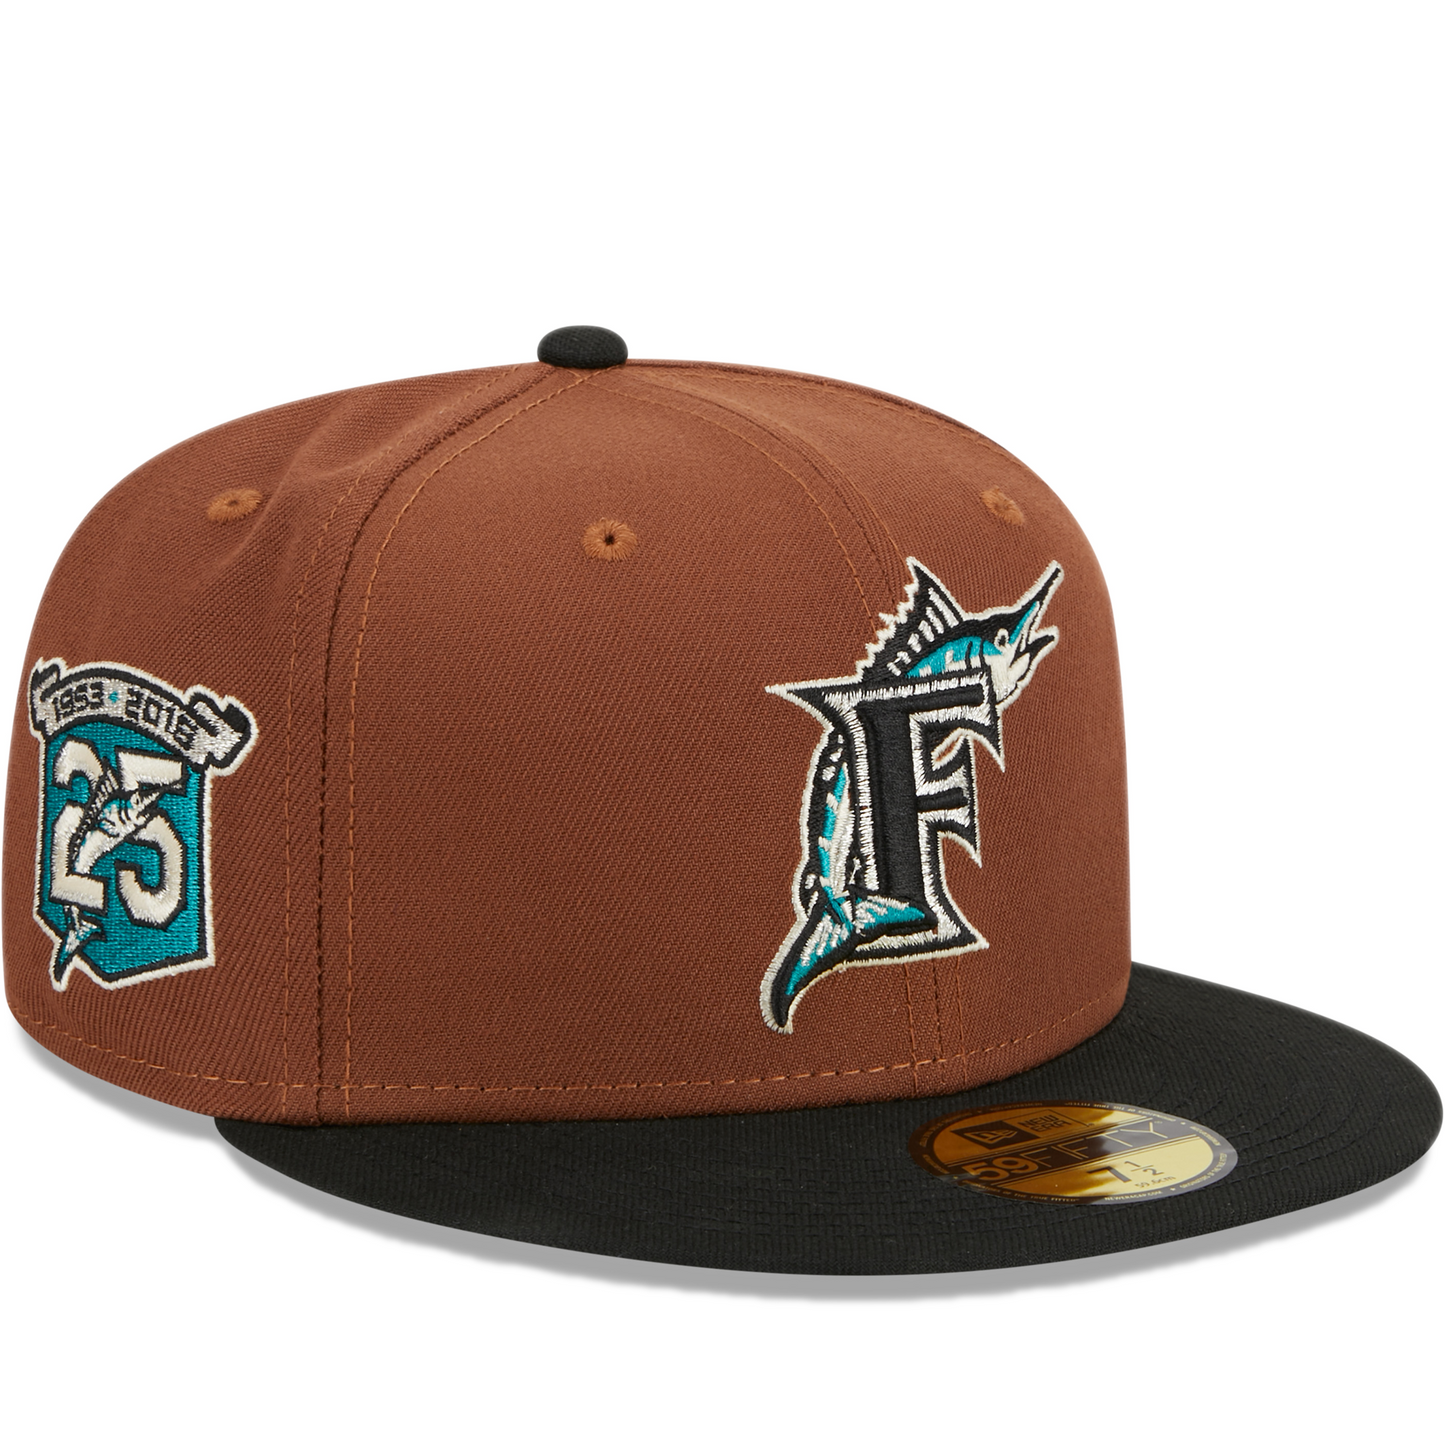 New Era Florida Marlins 59FIFTY Fitted Hat - Brown/ Black